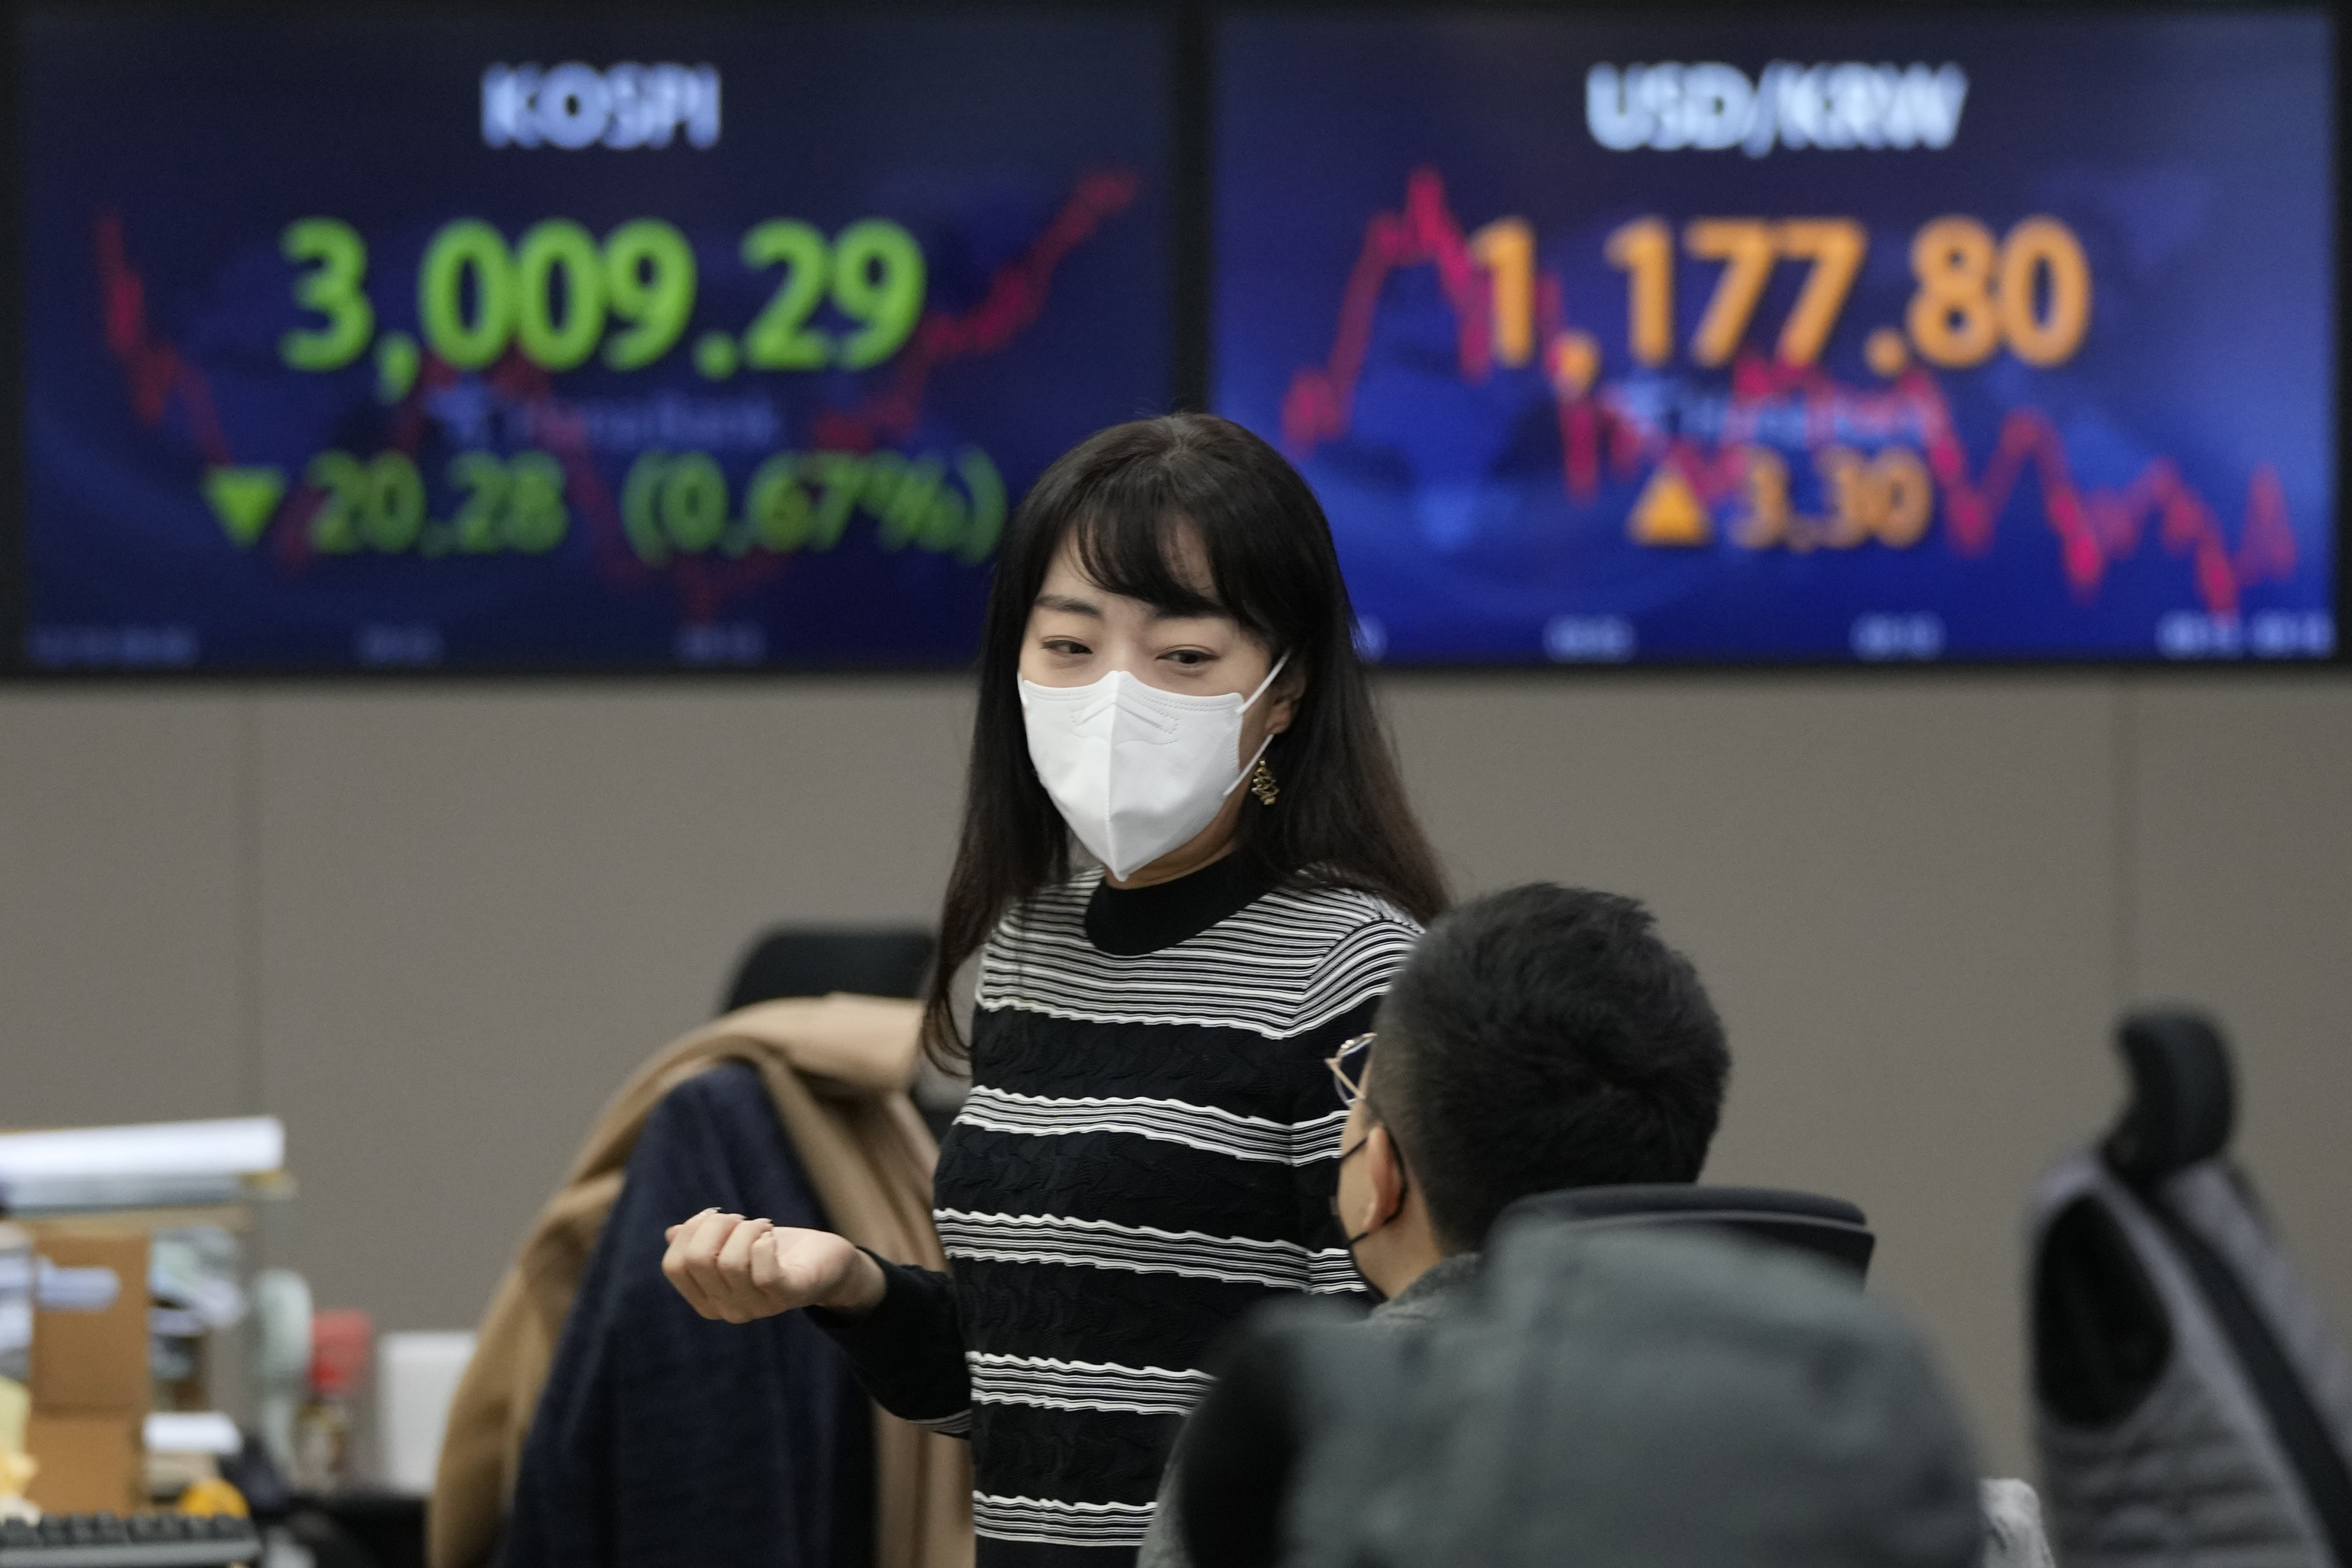 Currency traders talk each other near screens showing the Korea Composite Stock Price Index (KOSPI), left, and the foreign exchange rate between U.S. dollar and South Korean won, right, at the foreign exchange dealing room of the KEB Hana Bank headquarters in Seoul, South Korea, Friday, Dec. 10, 2021. Asian stock markets followed Wall Street lower Friday as a rally cooled and investors waited for U.S. inflation data that might influence a Federal Reserve decision on when to roll back economic stimulus. (AP Photo/Ahn Young-joon)